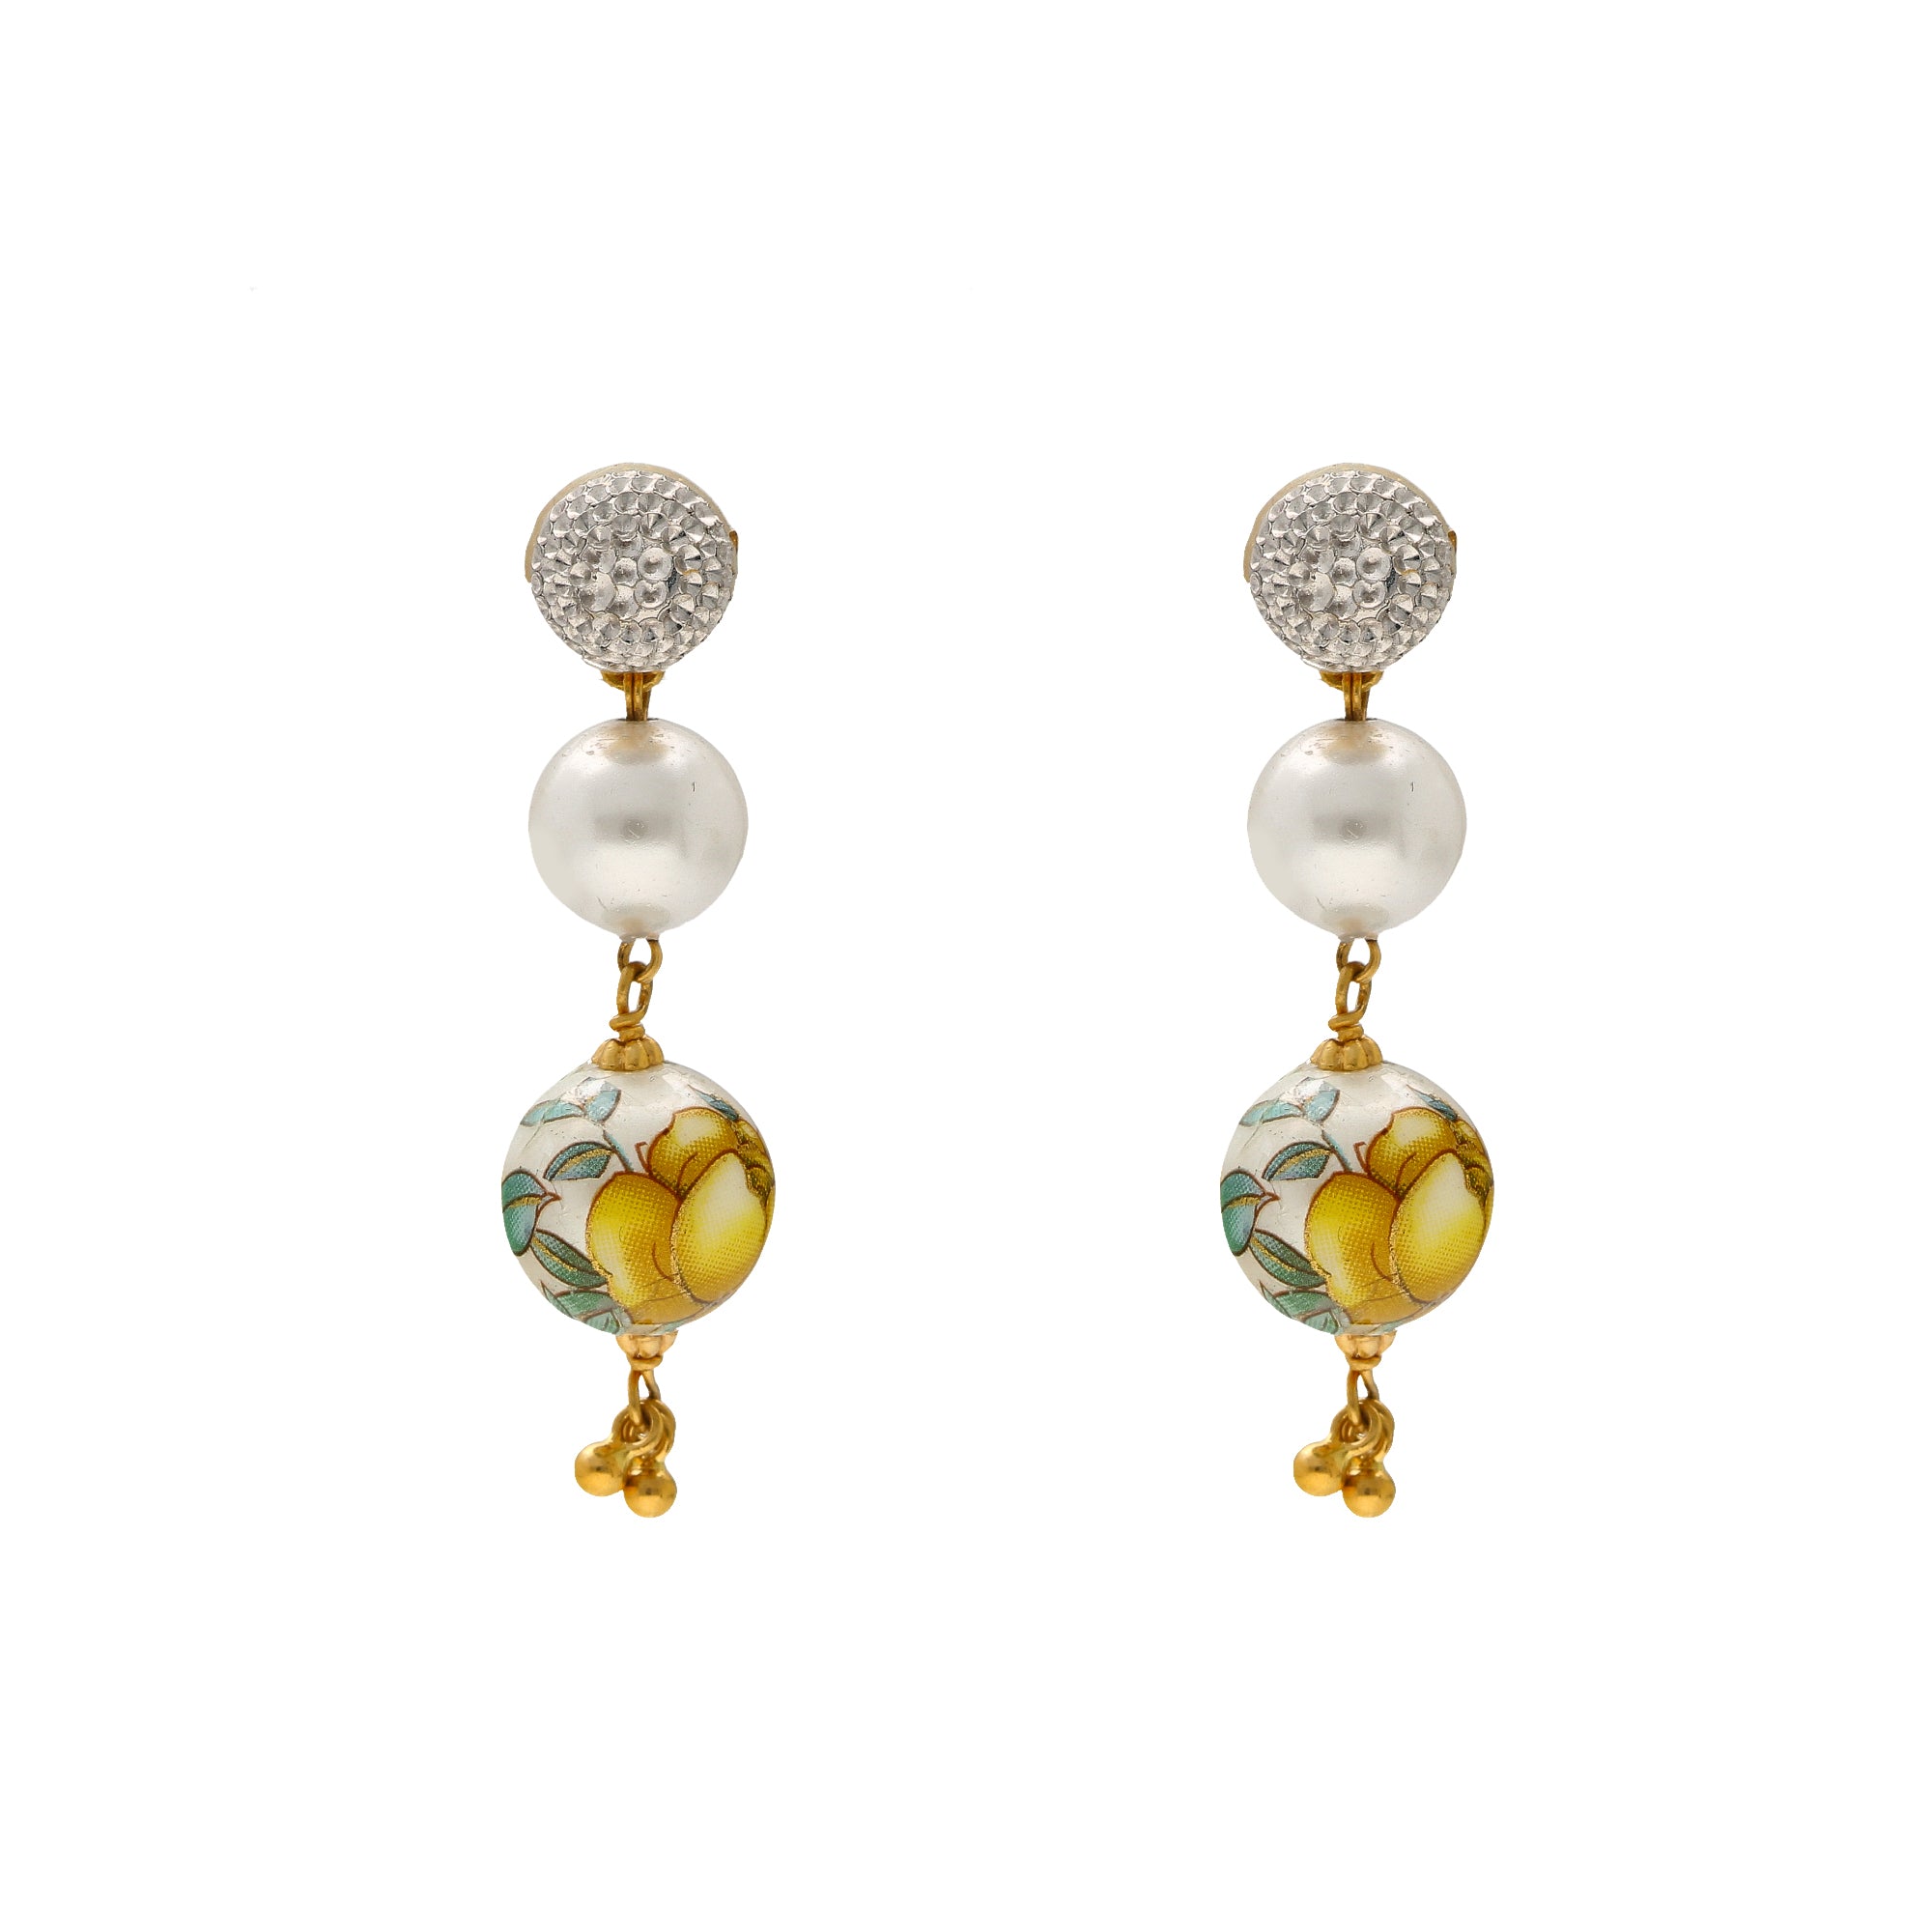 22k gold plated Handmade pearl earrings with hand crafted sodalite |  Instagram